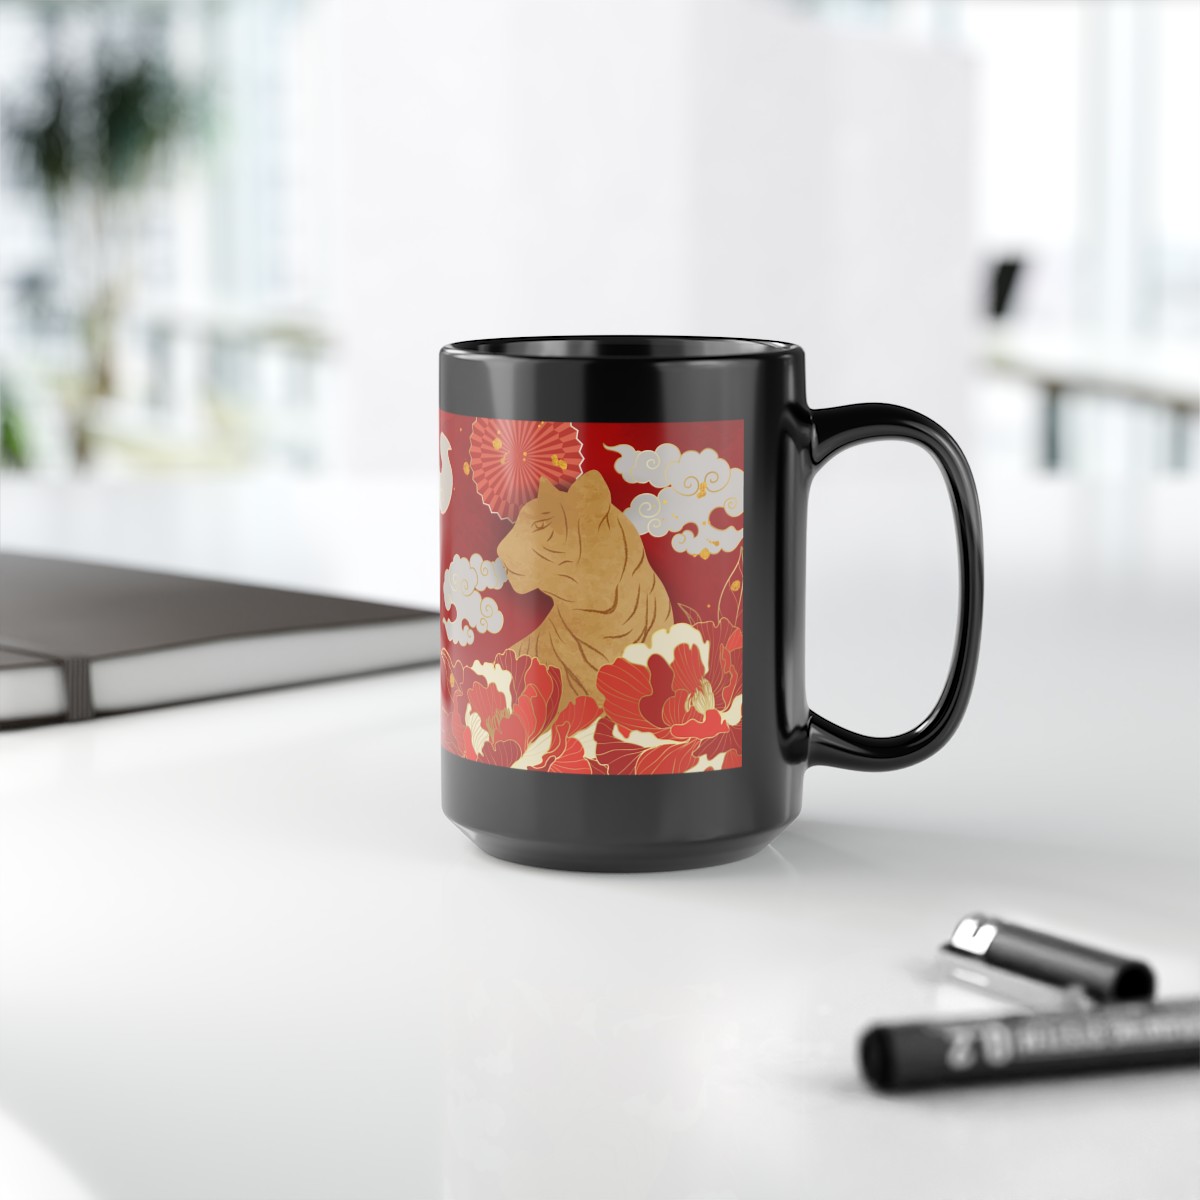 The Art of War Quote - If the Mind is Willing, the Flesh Could Go On - 15 oz Mug product thumbnail image